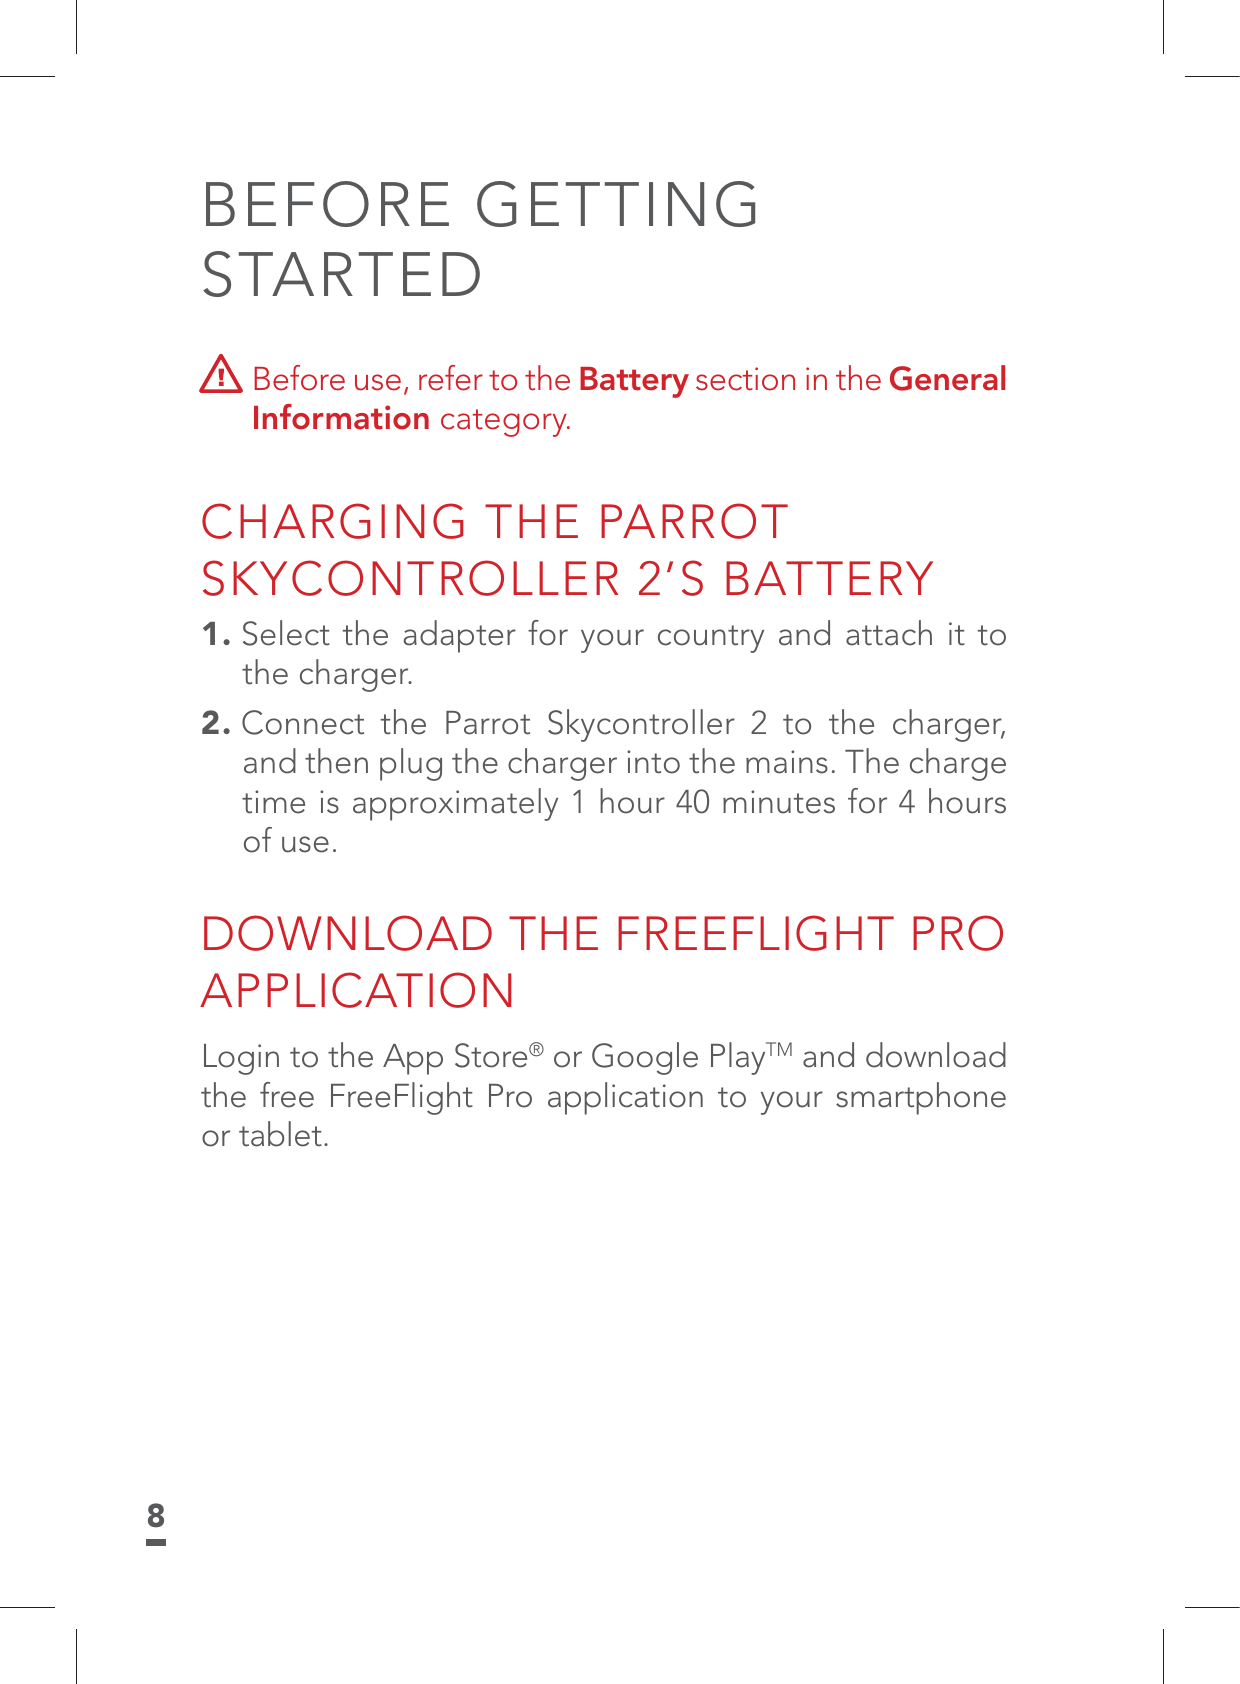 8BEFORE GETTING STARTED  Before use, refer to the Battery section in the General Information category. CHARGING THE PARROT SKYCONTROLLER 2’S BATTERY1. Select the adapter for your country and attach it to the charger.2. Connect the Parrot Skycontroller 2 to the charger, and then plug the charger into the mains. The charge time is approximately 1 hour 40 minutes for 4 hours of use.DOWNLOAD THE FREEFLIGHT PRO APPLICATIONLogin to the App Store® or Google PlayTM and download the free FreeFlight Pro application to your smartphone or tablet.